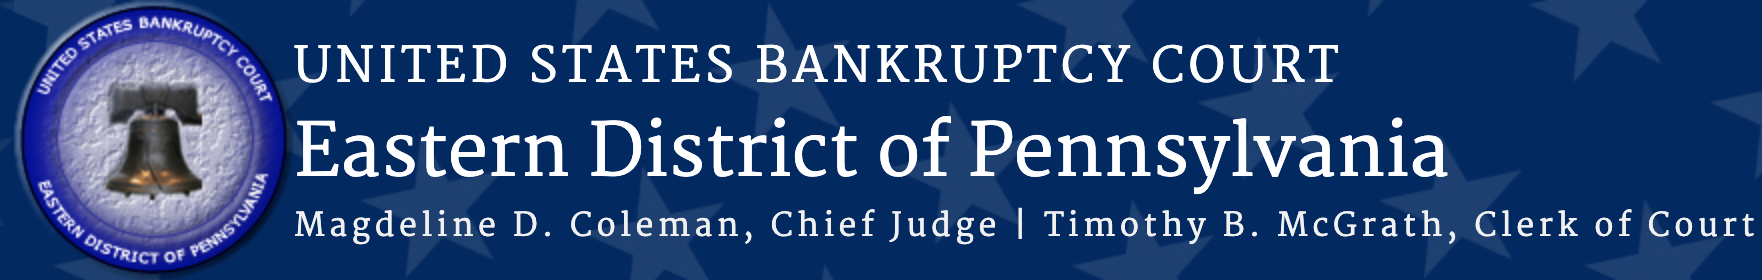 The U.S. Bankruptcy Court for the Eastern District of Pennsylvania